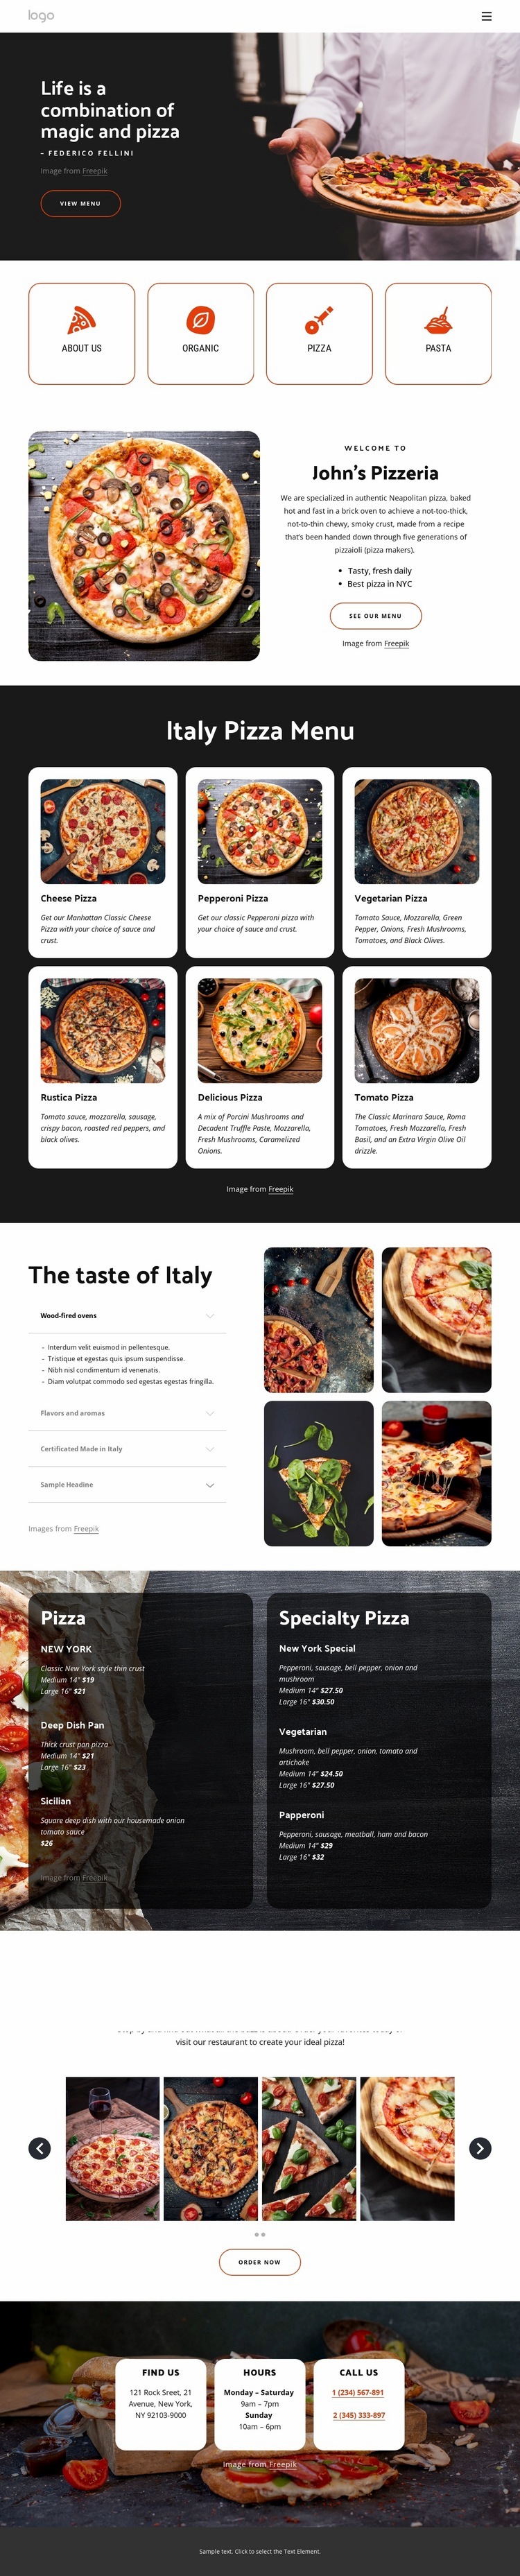 Family-friendly pizza restaurant Web Page Design